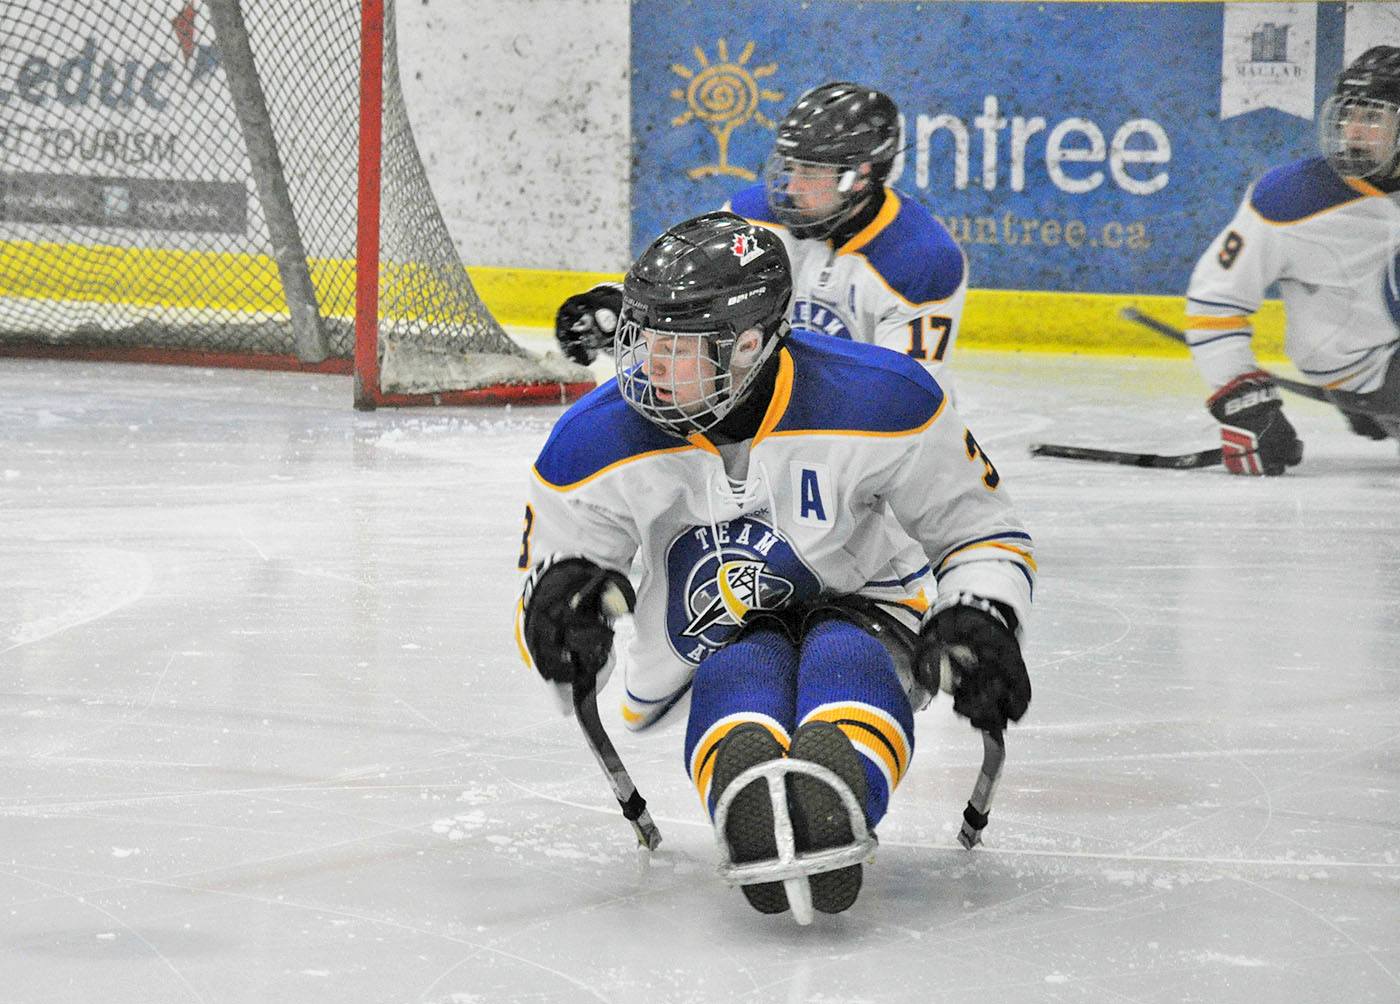 CHAMPS - Central Alberta player Tanner Fandrey is pictured at the Canadian Sledge Hockey Championships earlier this month.